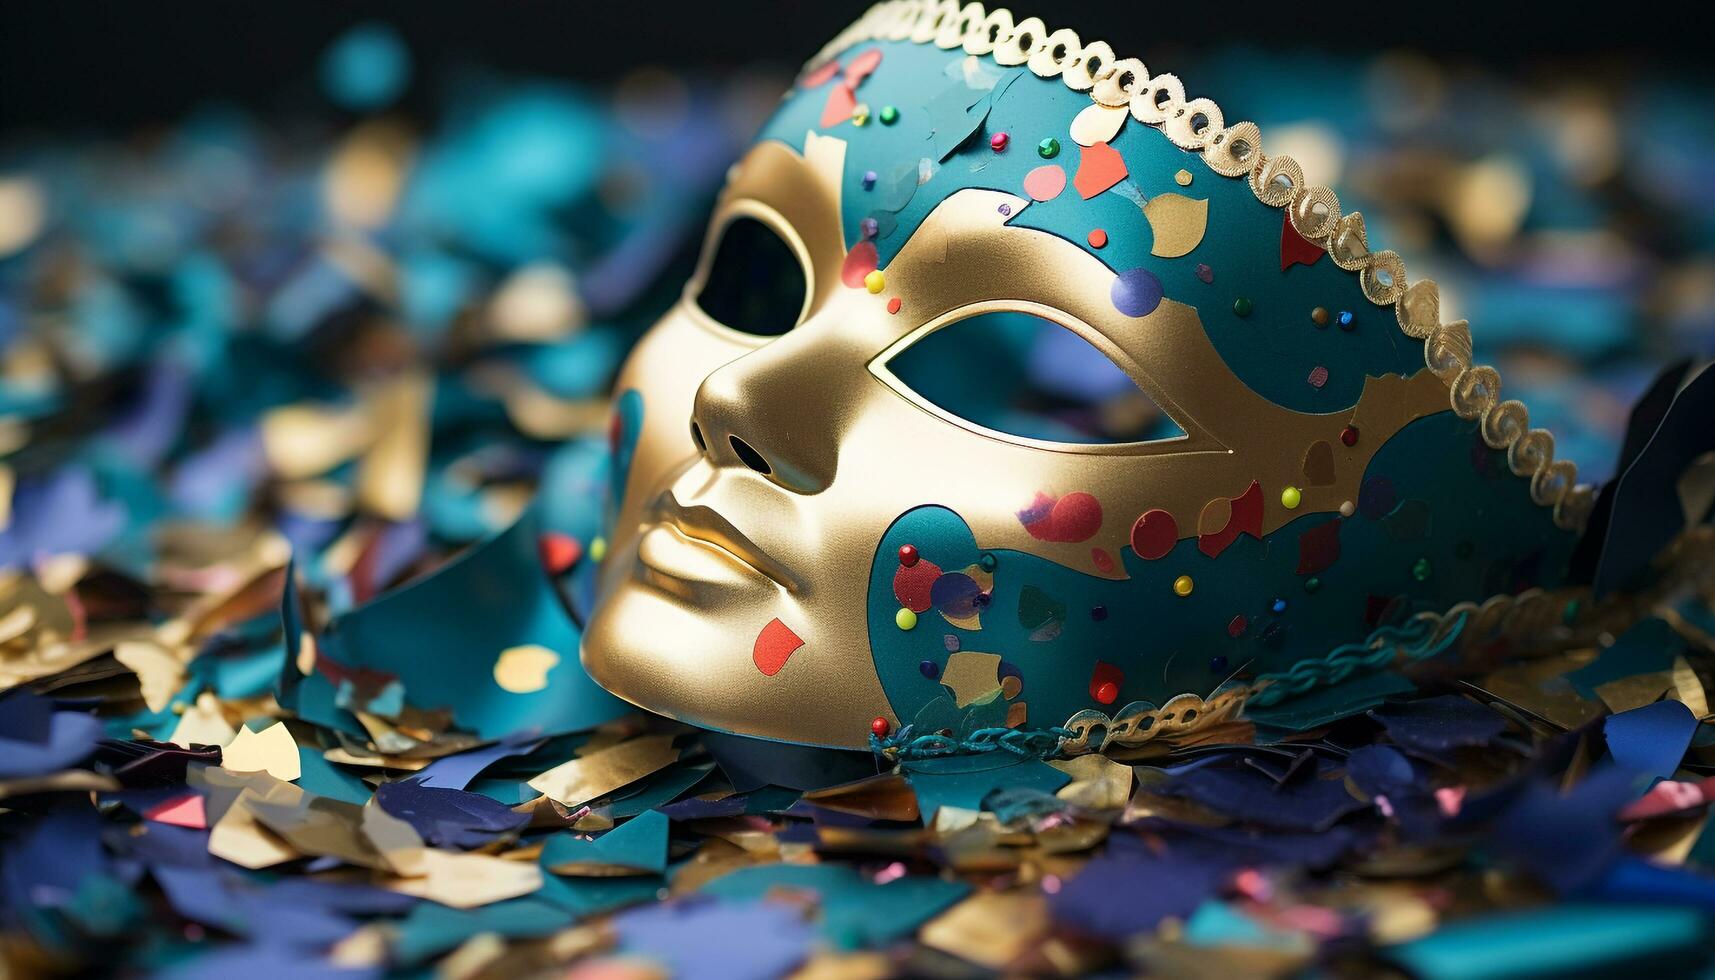 AI generated Celebration event with colorful costumes and masquerade masks generated by AI photo